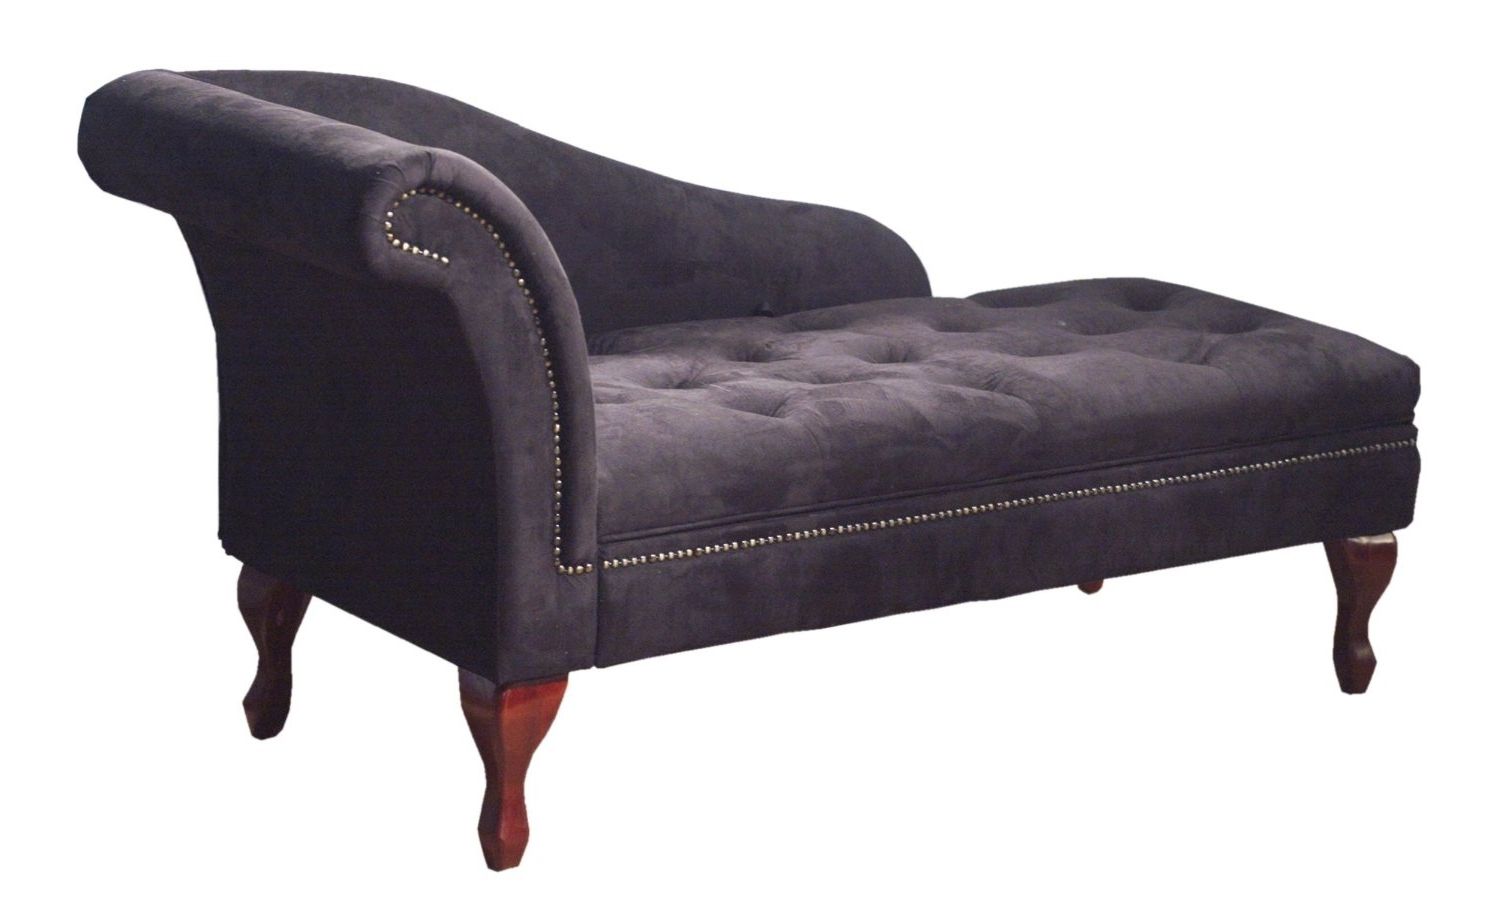 Black Indoors Chaise Lounge Chairs For Popular Furniture: Indoor Chaise Lounge Chair With Chaise Lounge Indoor (View 6 of 15)